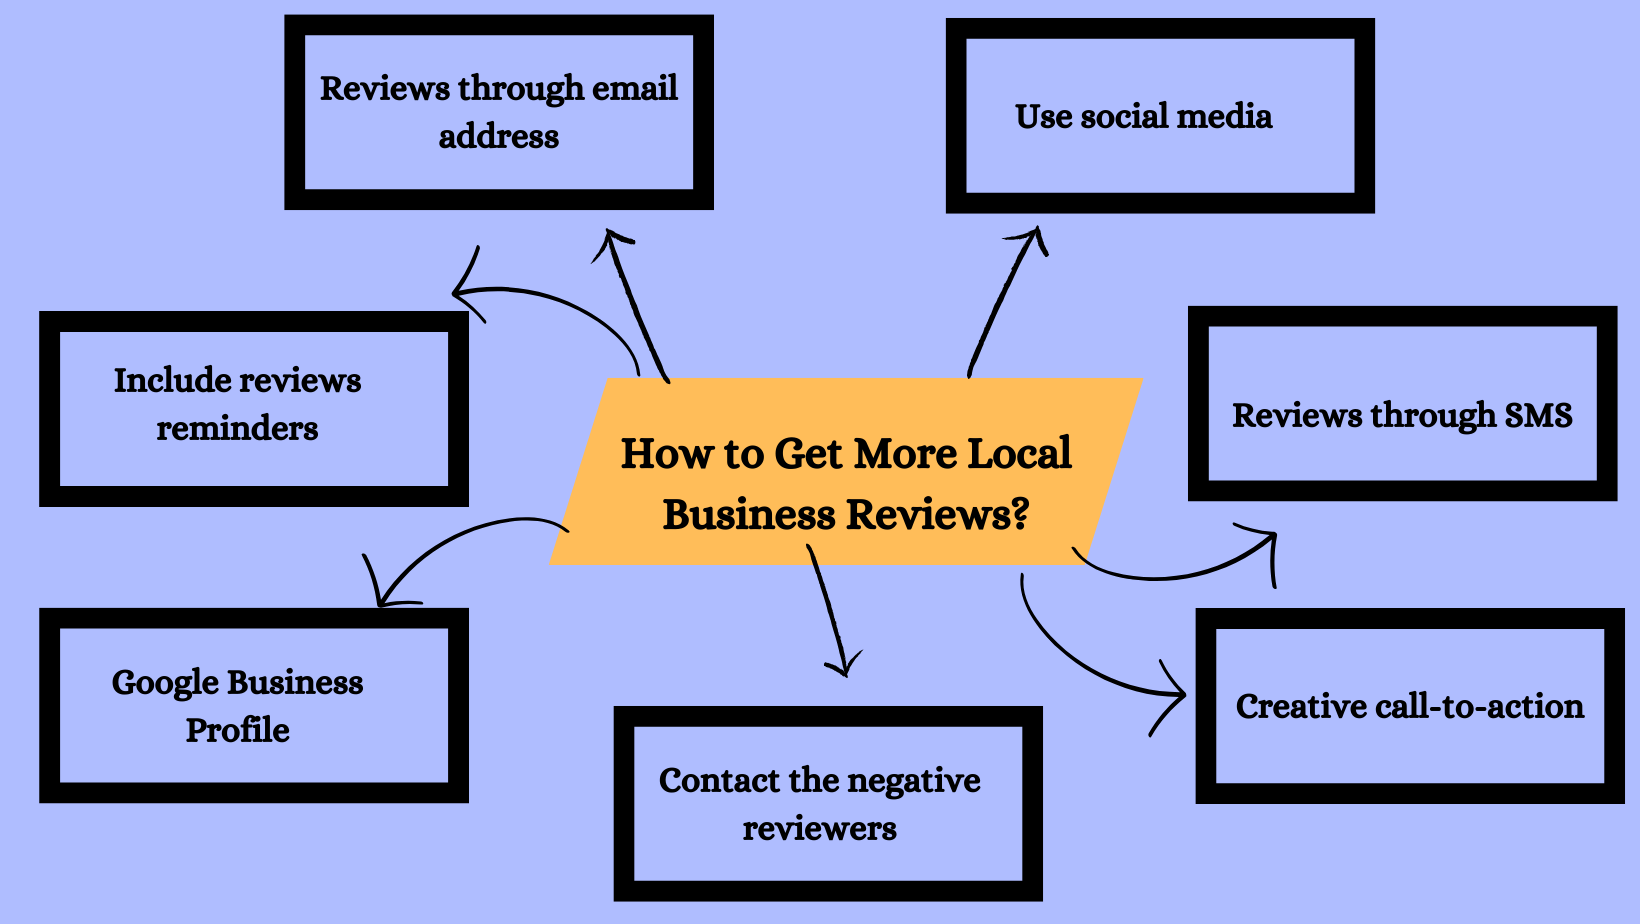 How to Get More Local Business Reviews